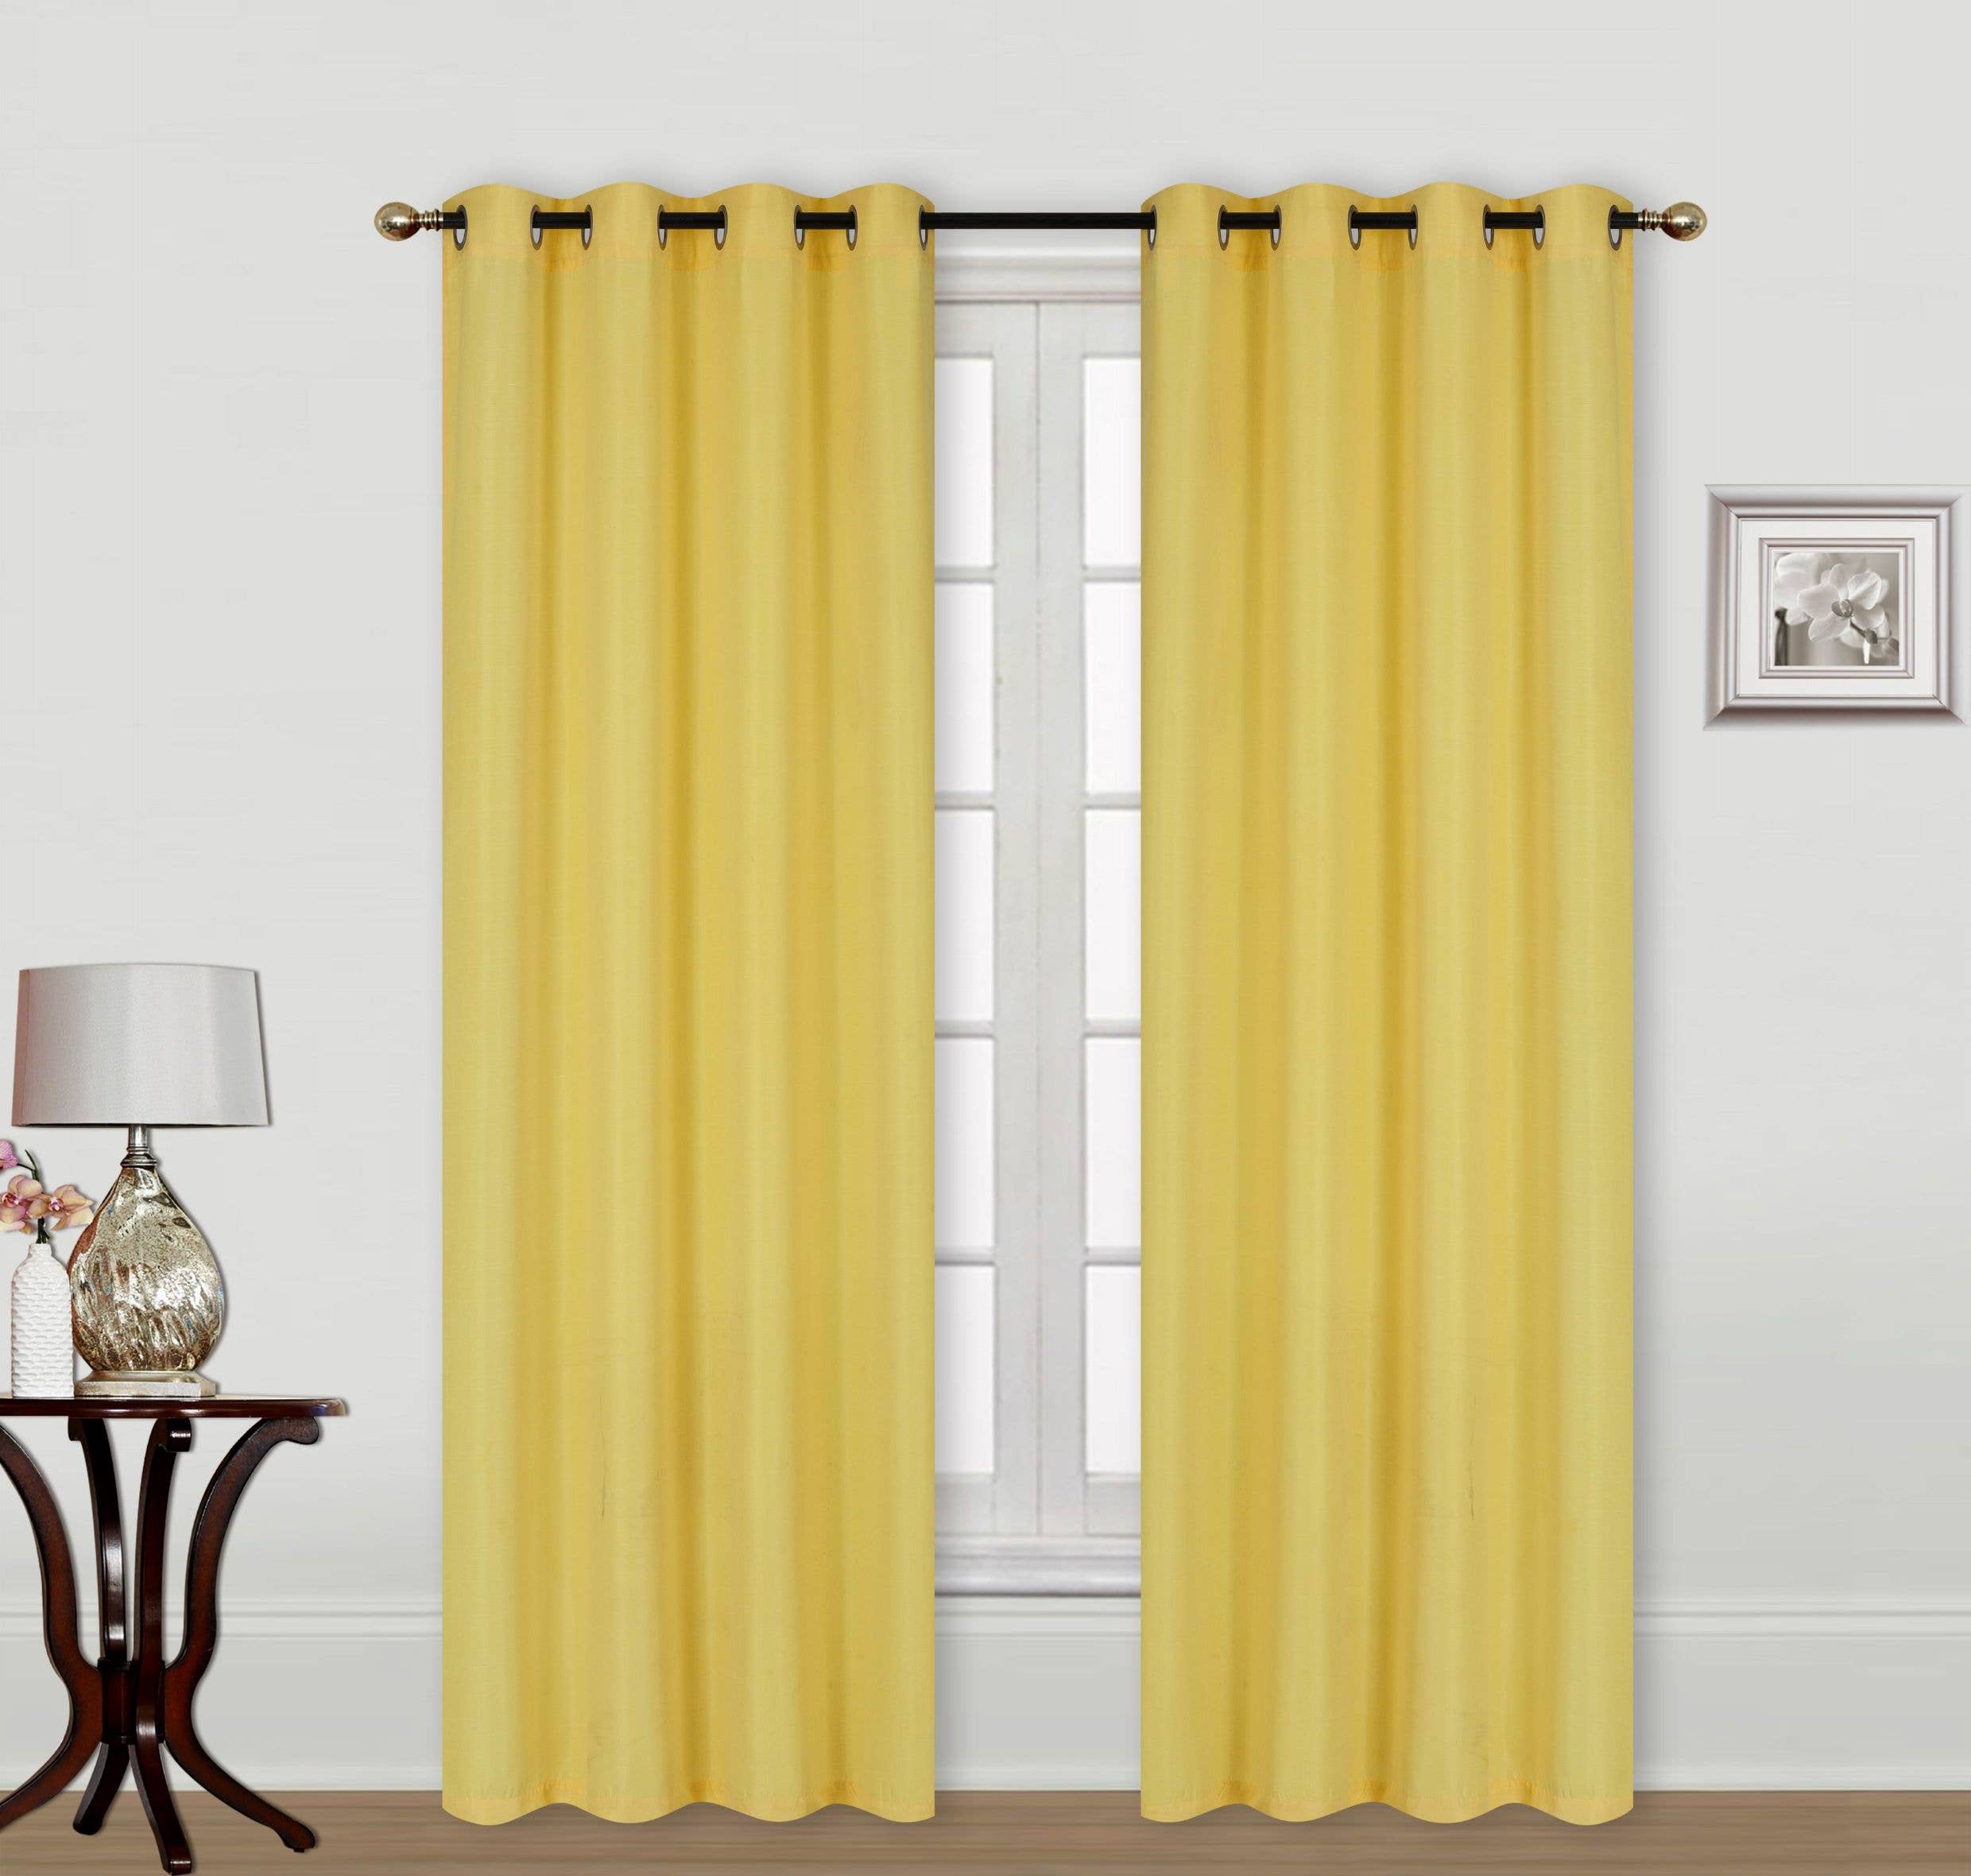 Home Curtains Solid Linen Wide Window Curtain Panel Pair with Grommet Top Window Treatment: 84" / NAVY